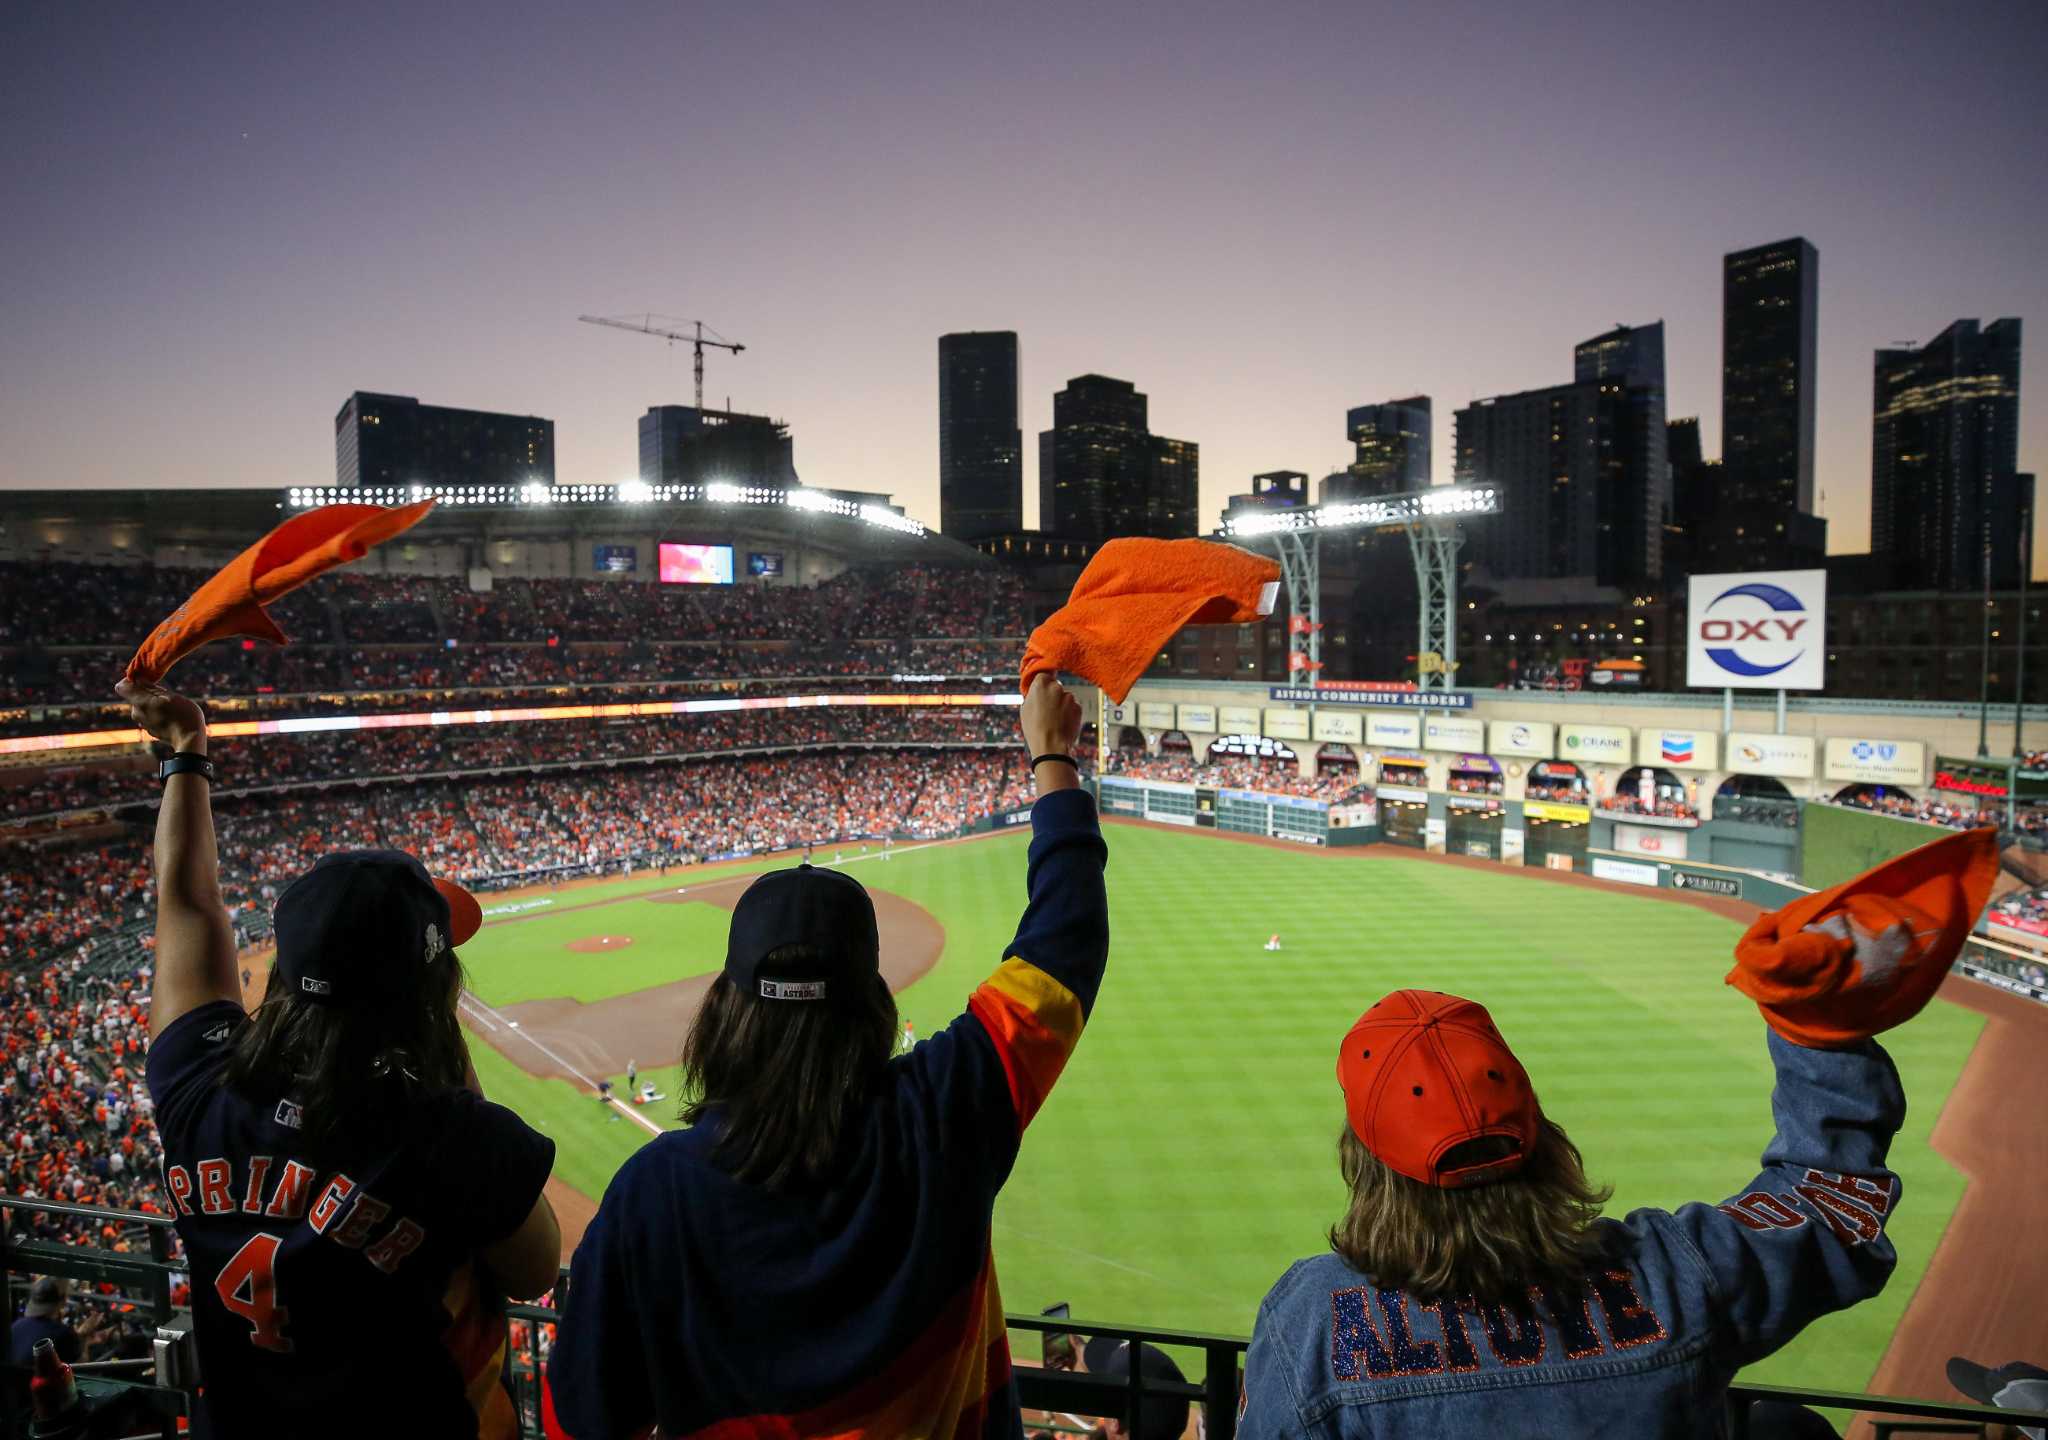 When Minute Maid Park's 6-acre roof opens, some Astros fans enjoy